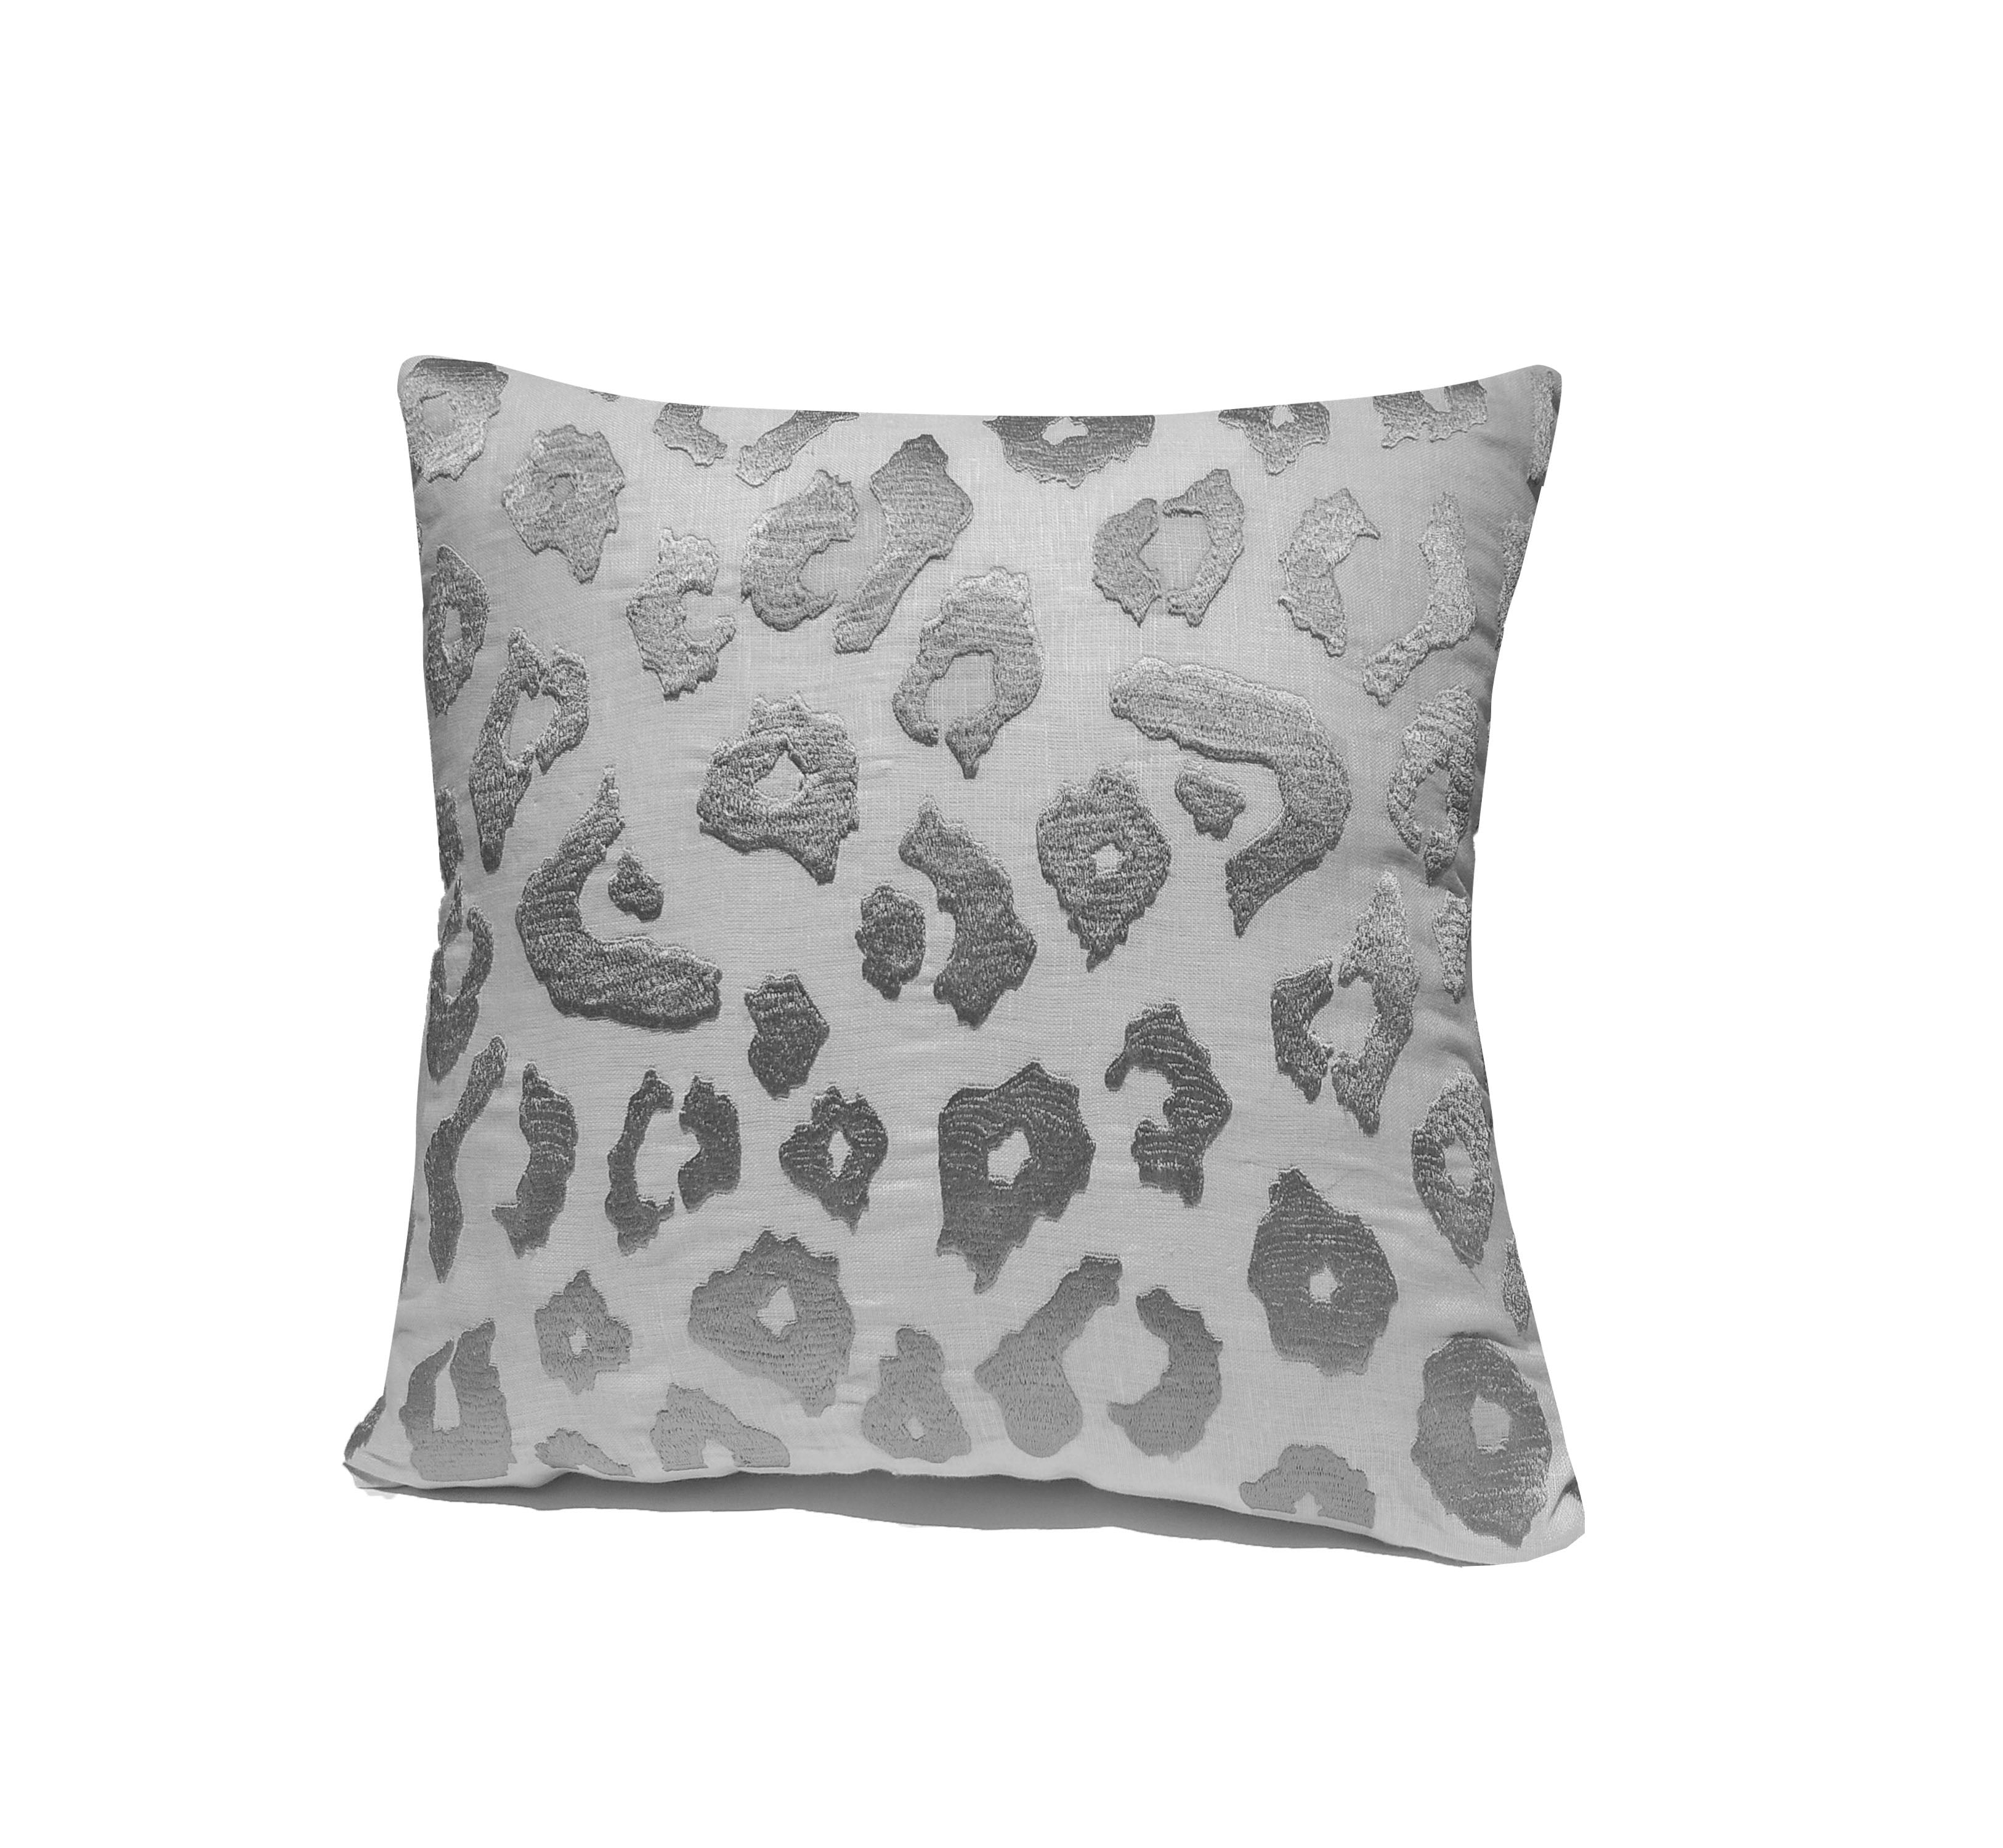 Amore Beaute pillow cover is a classic and beautiful piece that brings in the beauty of the jungle into your room.